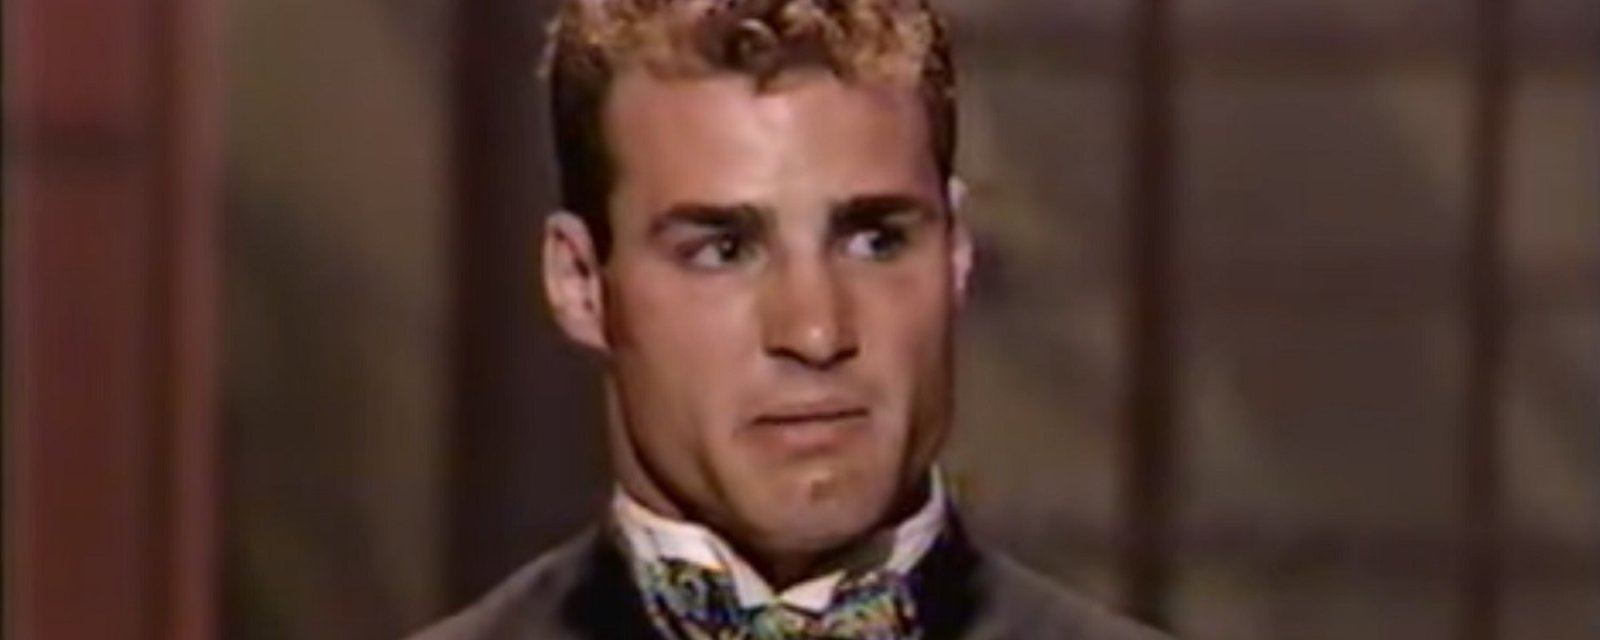 Throwback: Eric Lindros gives emotional speech after winning the Hart Memorial Trophy.